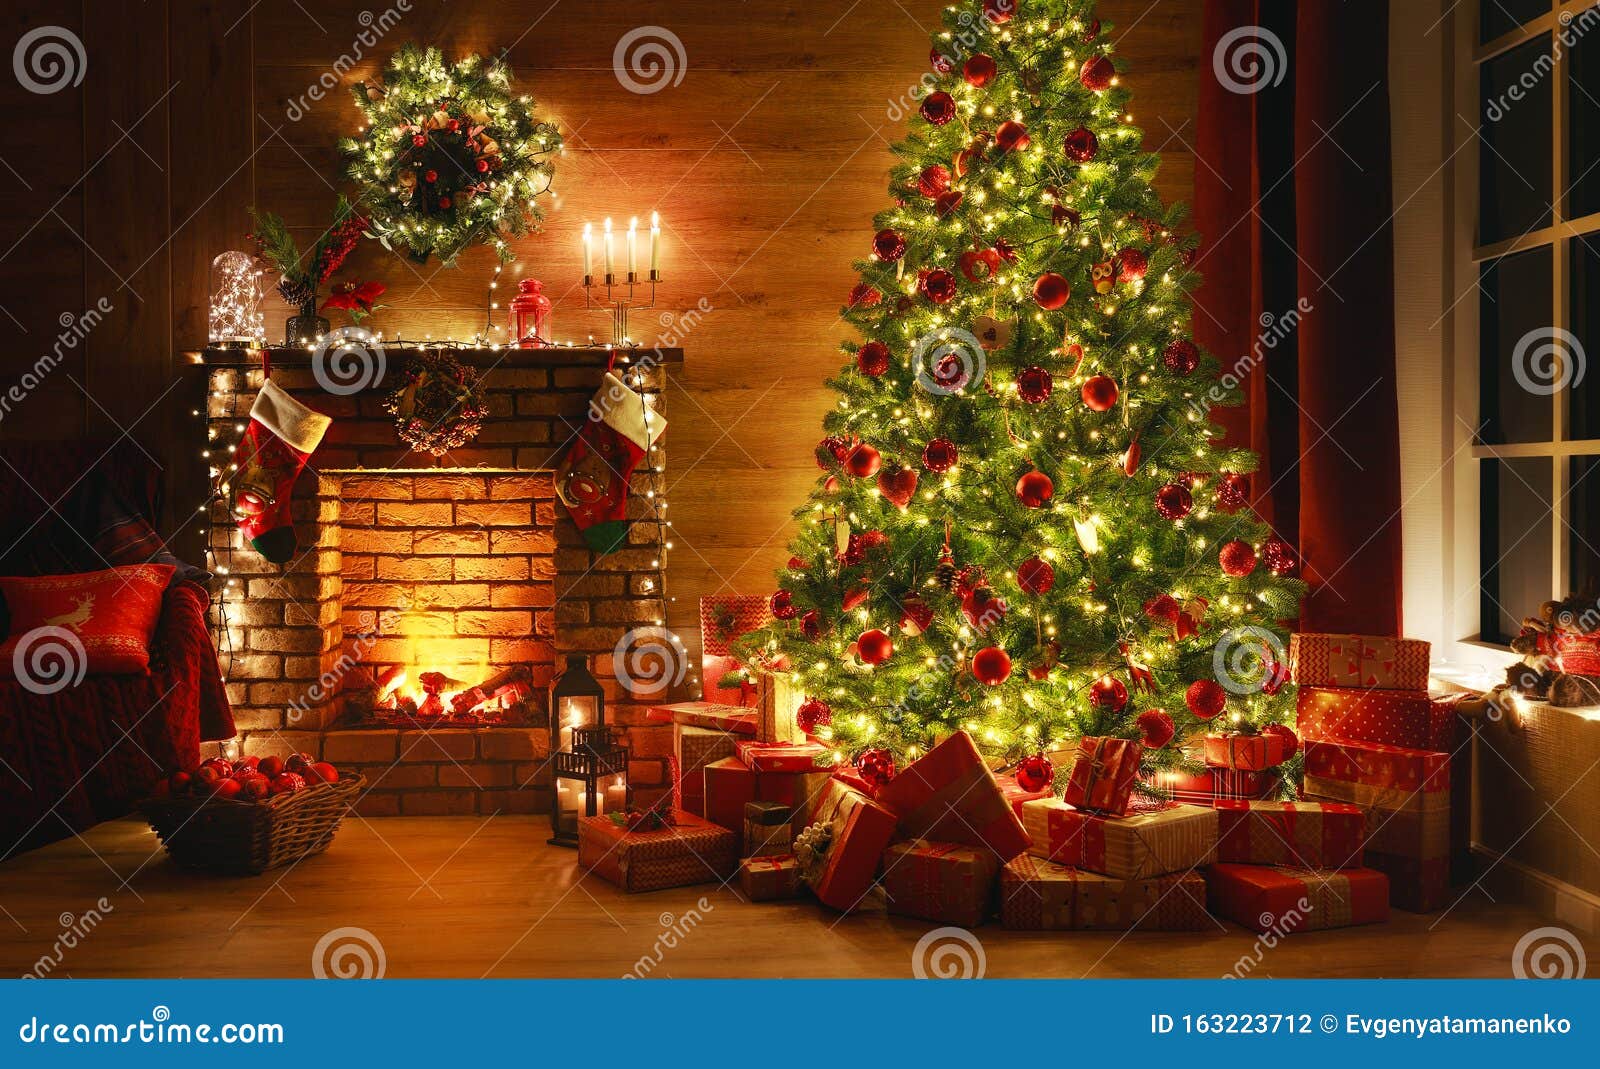 2 versions lovely place next to christmas tree and fireplace Christmas Digital background  backdrop Magical sparkles on fireplace